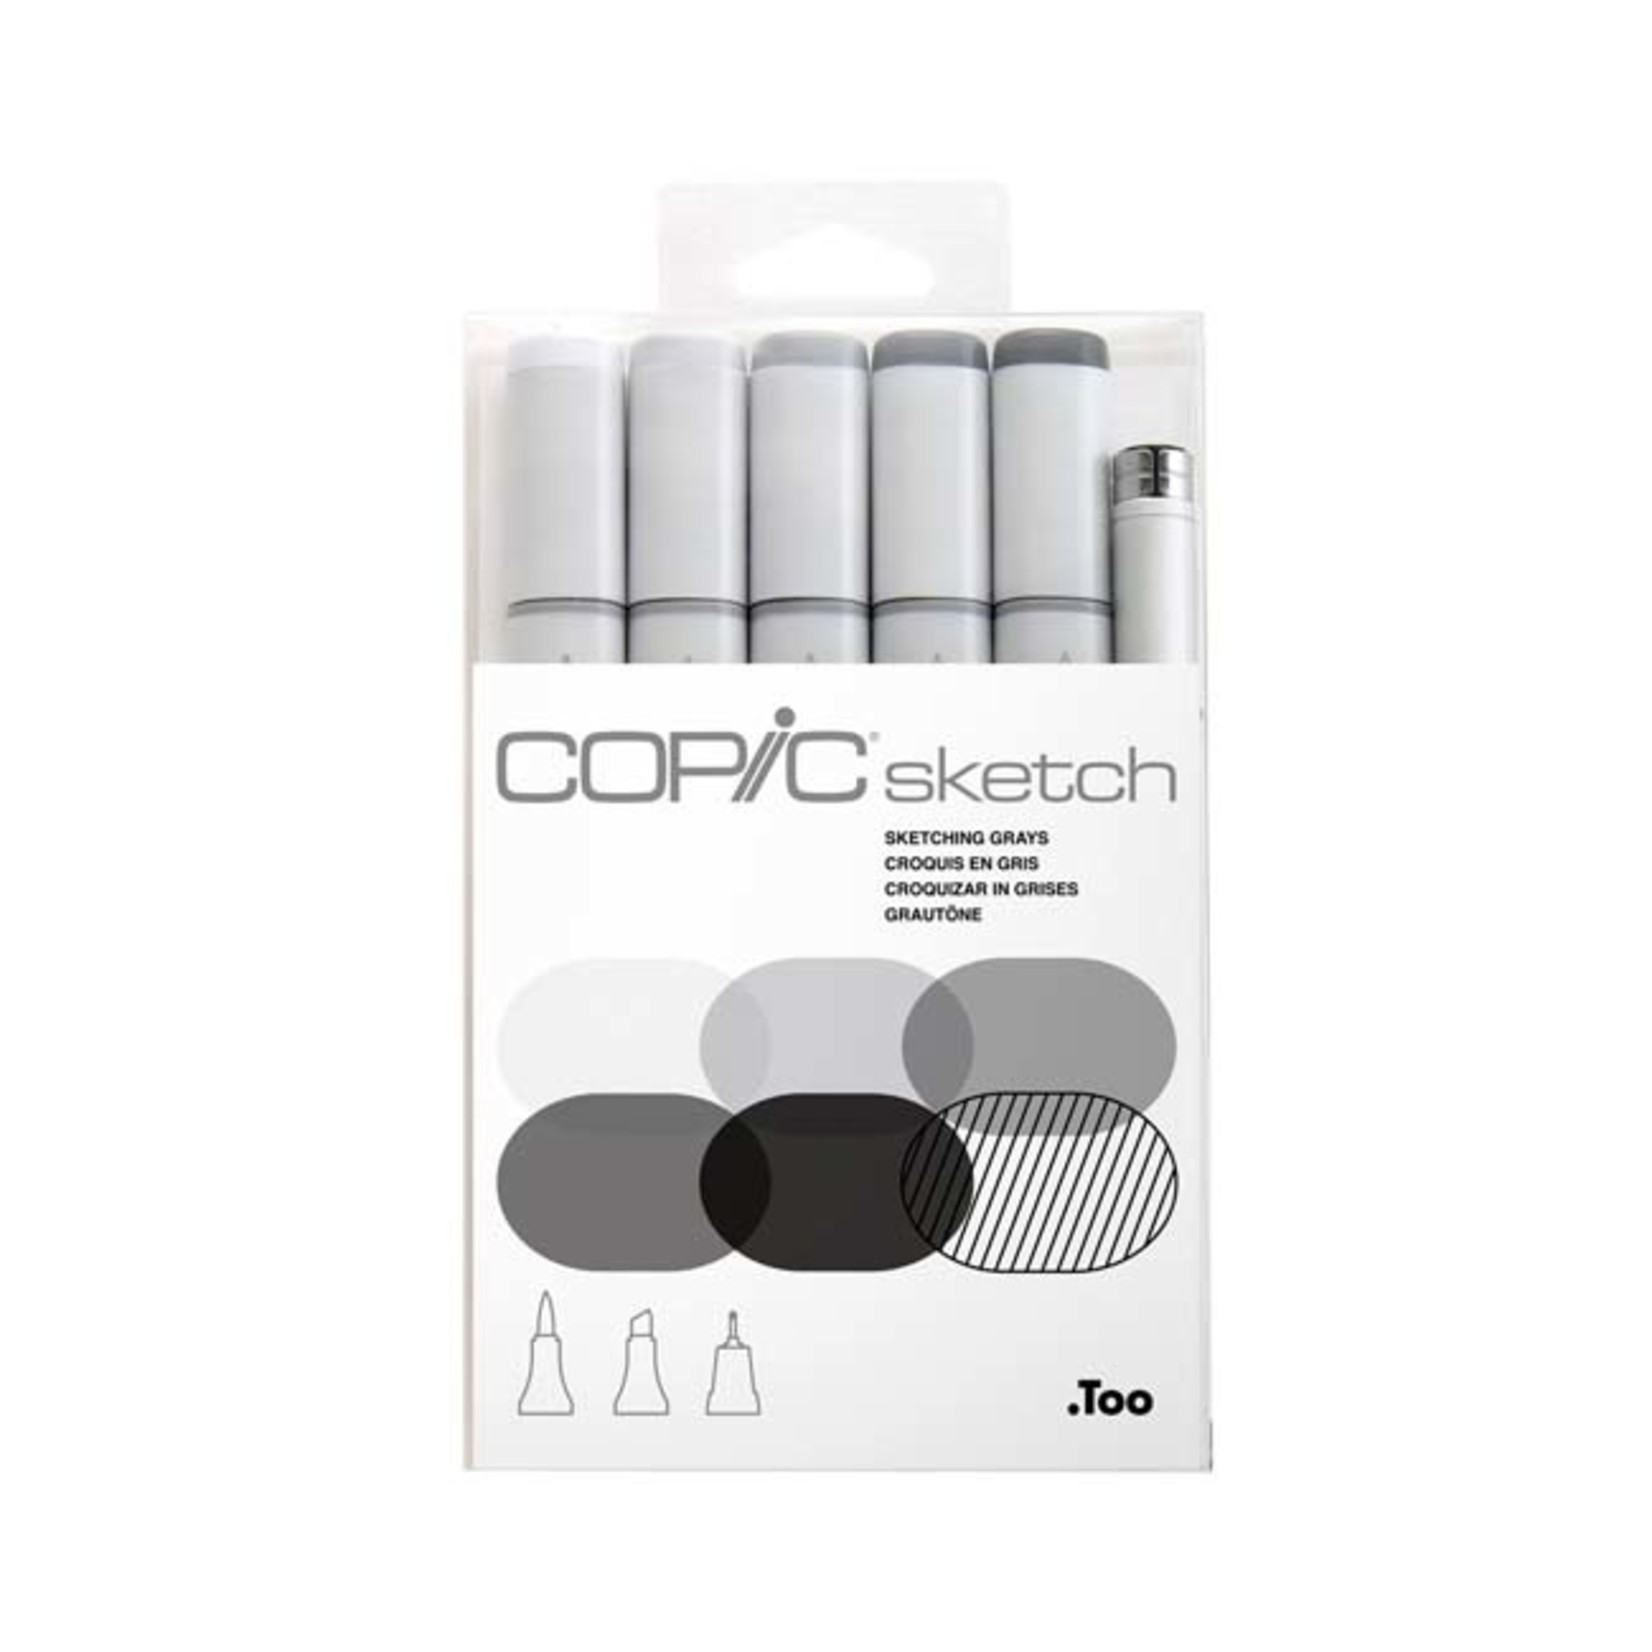 COPIC COPIC SKETCH SET/6 NEUTRAL SKETCHING GRAYS